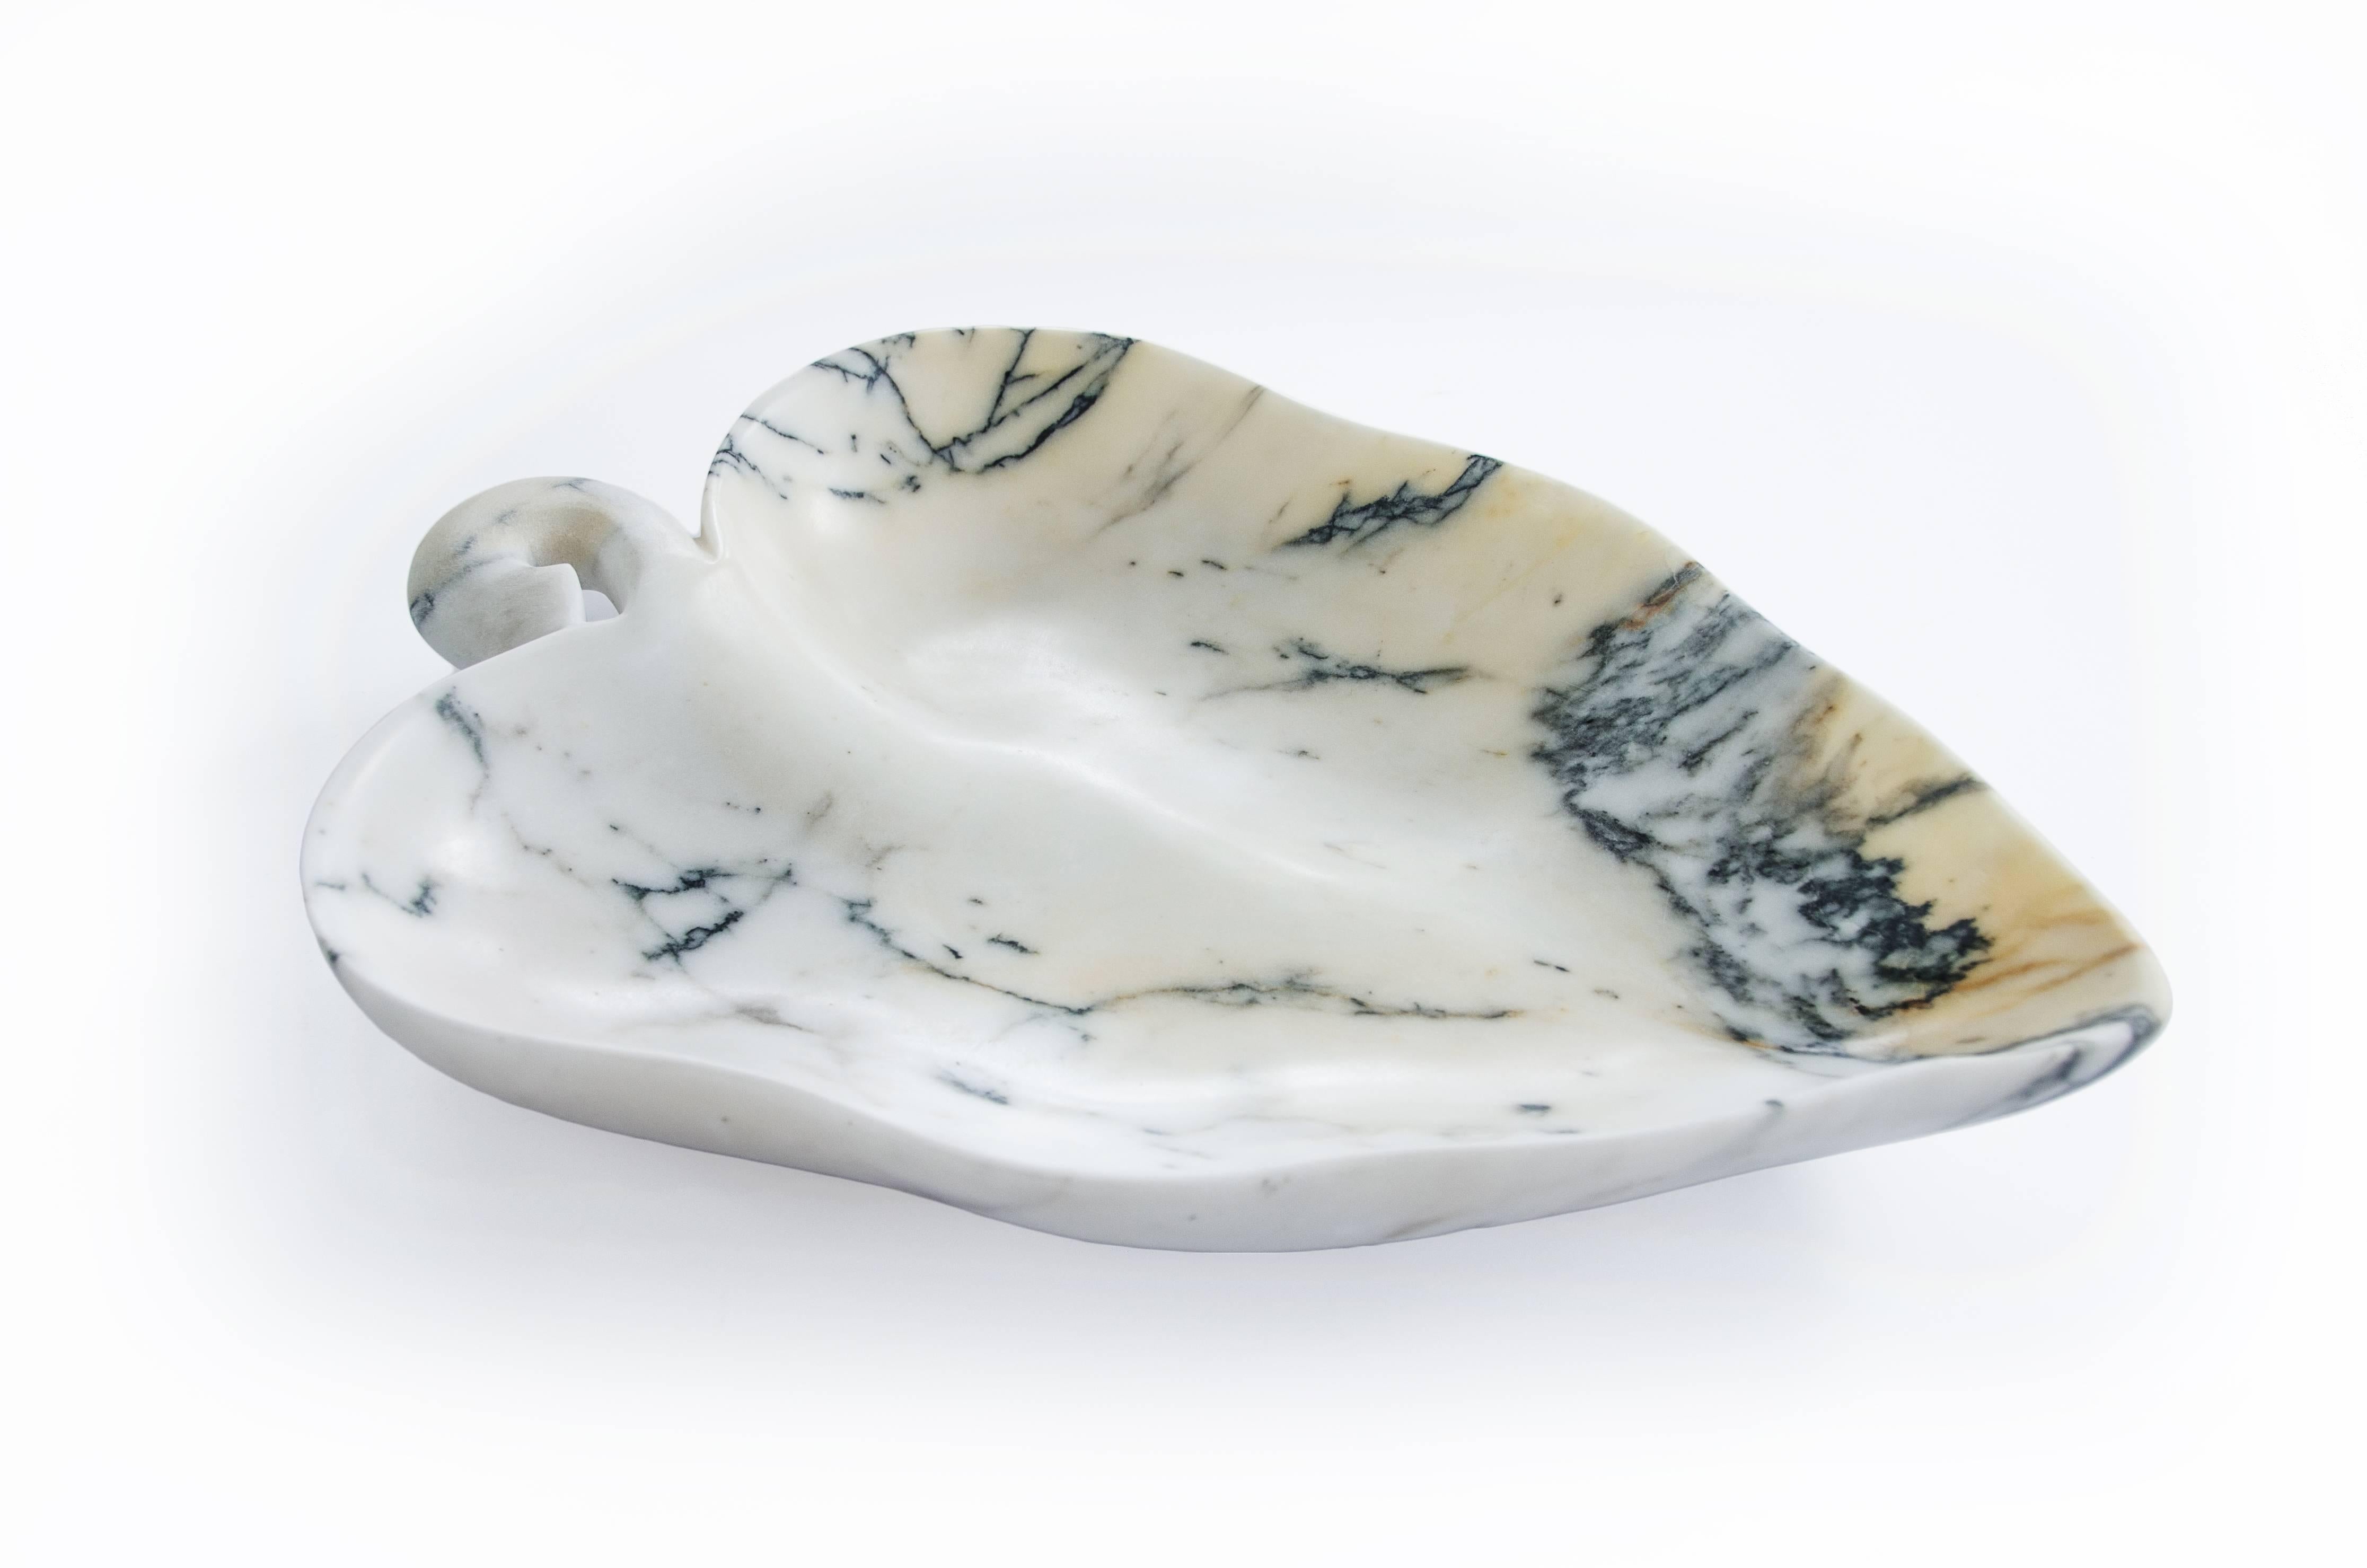 Big bowl in Paonazzo marble with the shape of a leaf. Each piece is in a way unique (since each marble block is different in veins and shades) and handmade by Italian artisans specialized over generations in processing the famous Carrara marble.